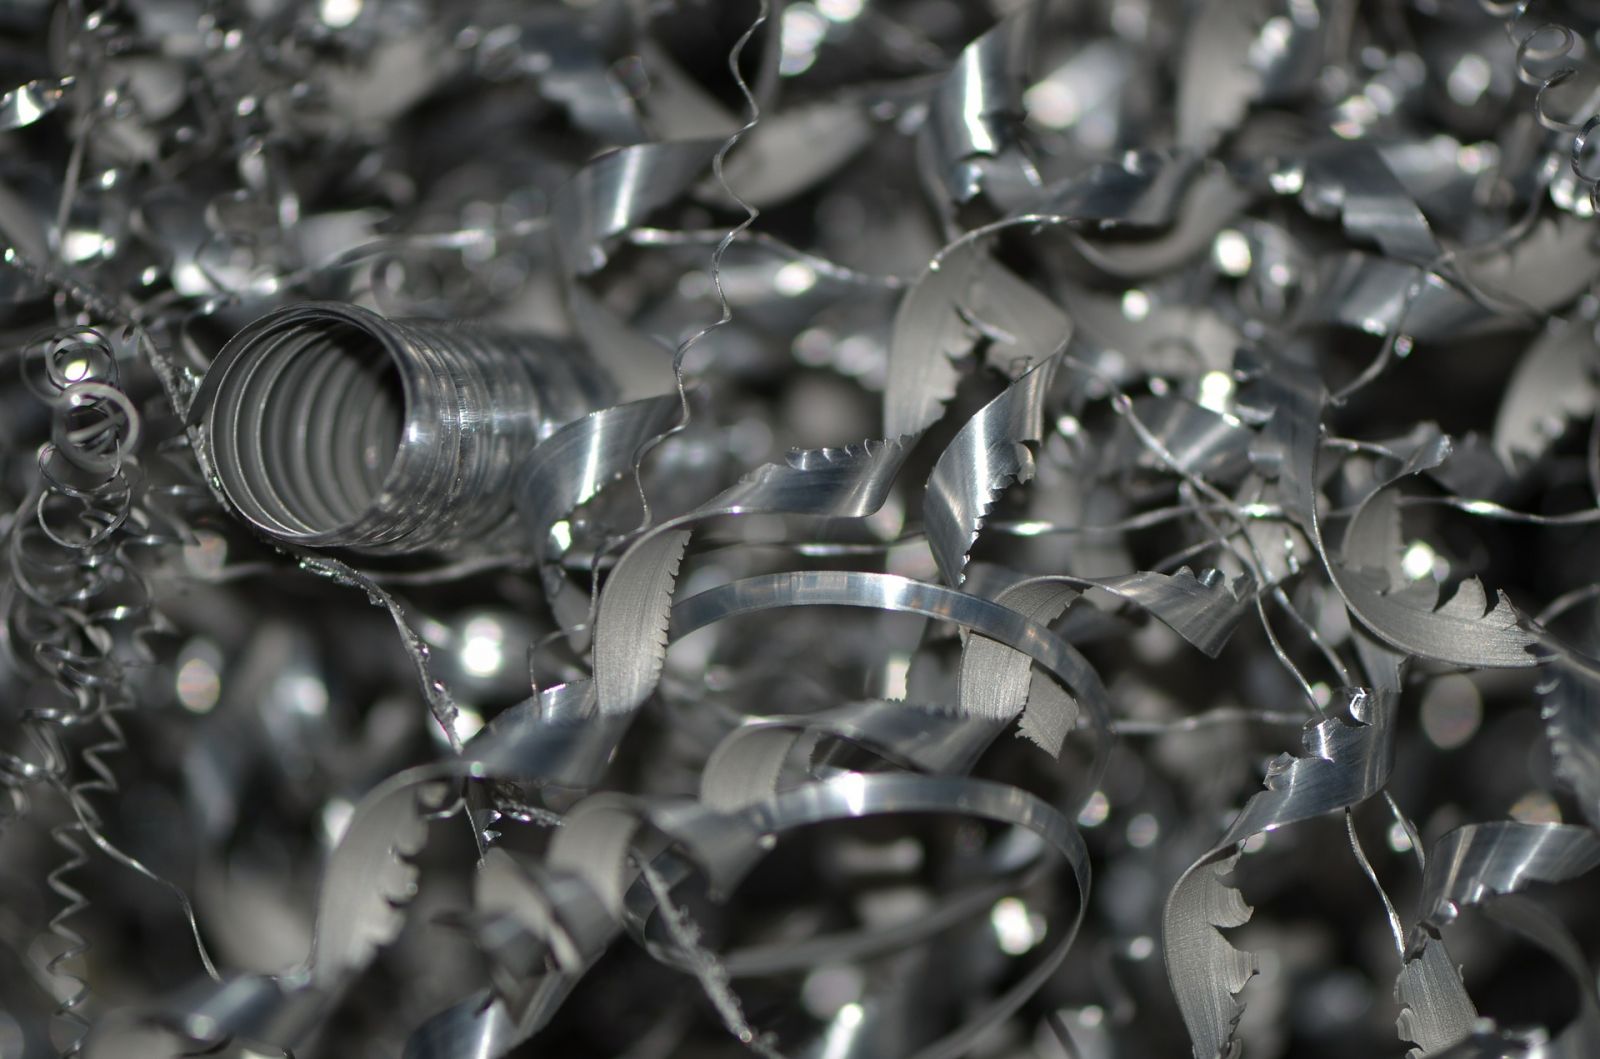 Why You Can Make More Money than Ever by Recycling Silver — Reclaim, Recycle,  and Sell your Precious Metal Scrap